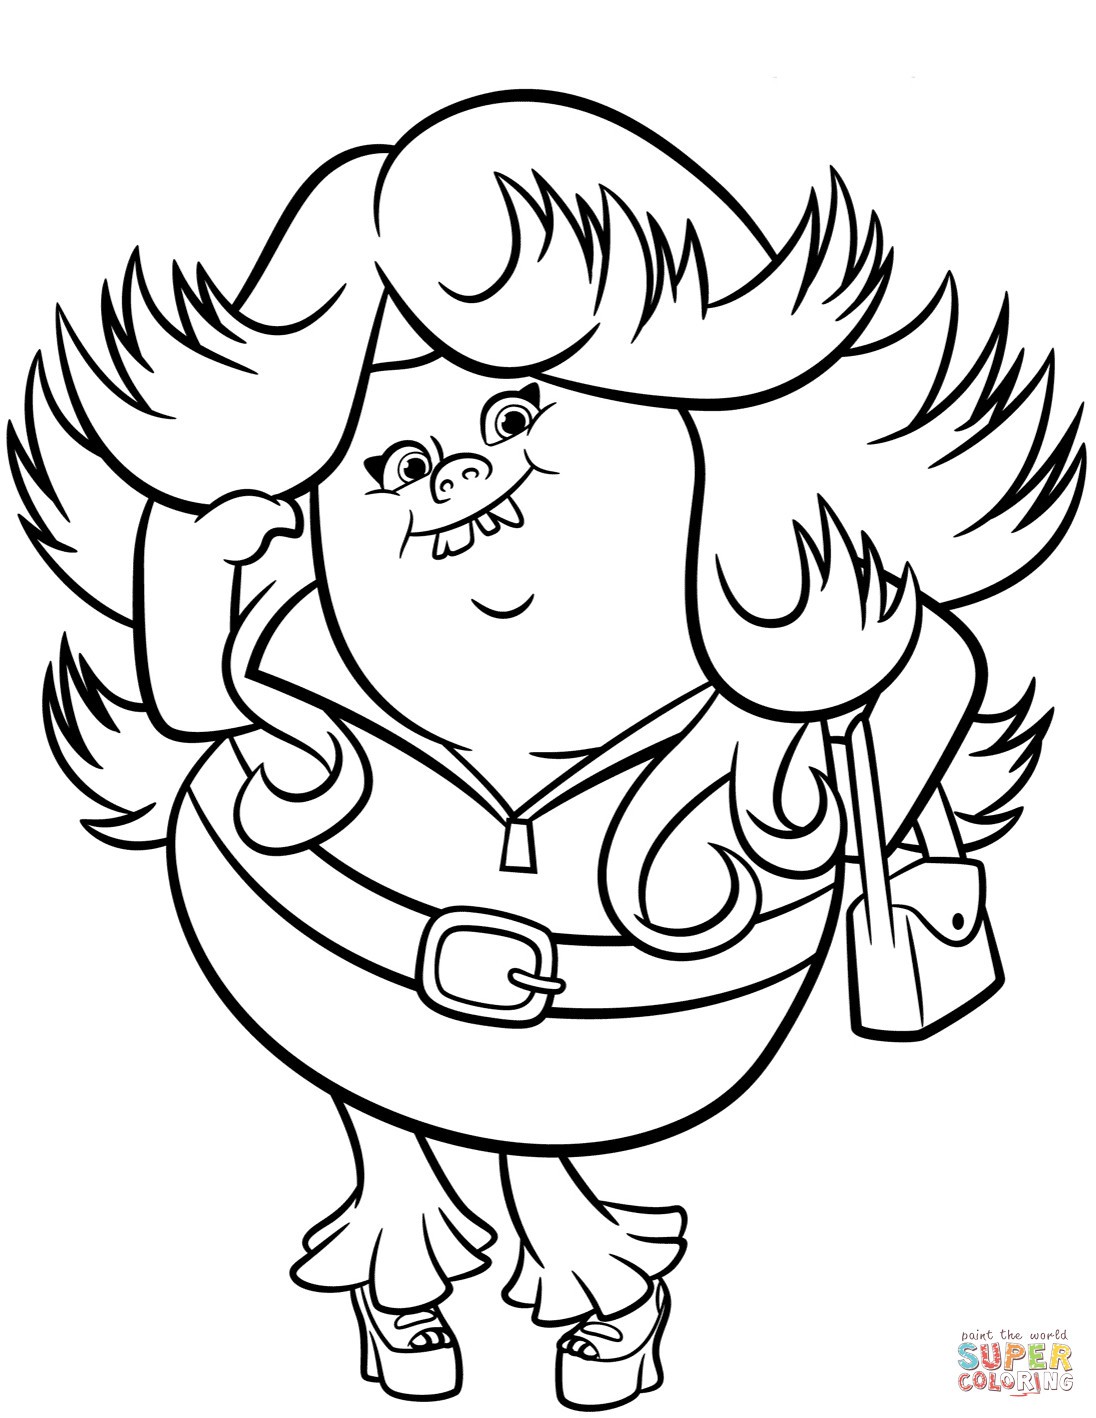 Lady Glitter Sparkles From Trolls Coloring Page Troll